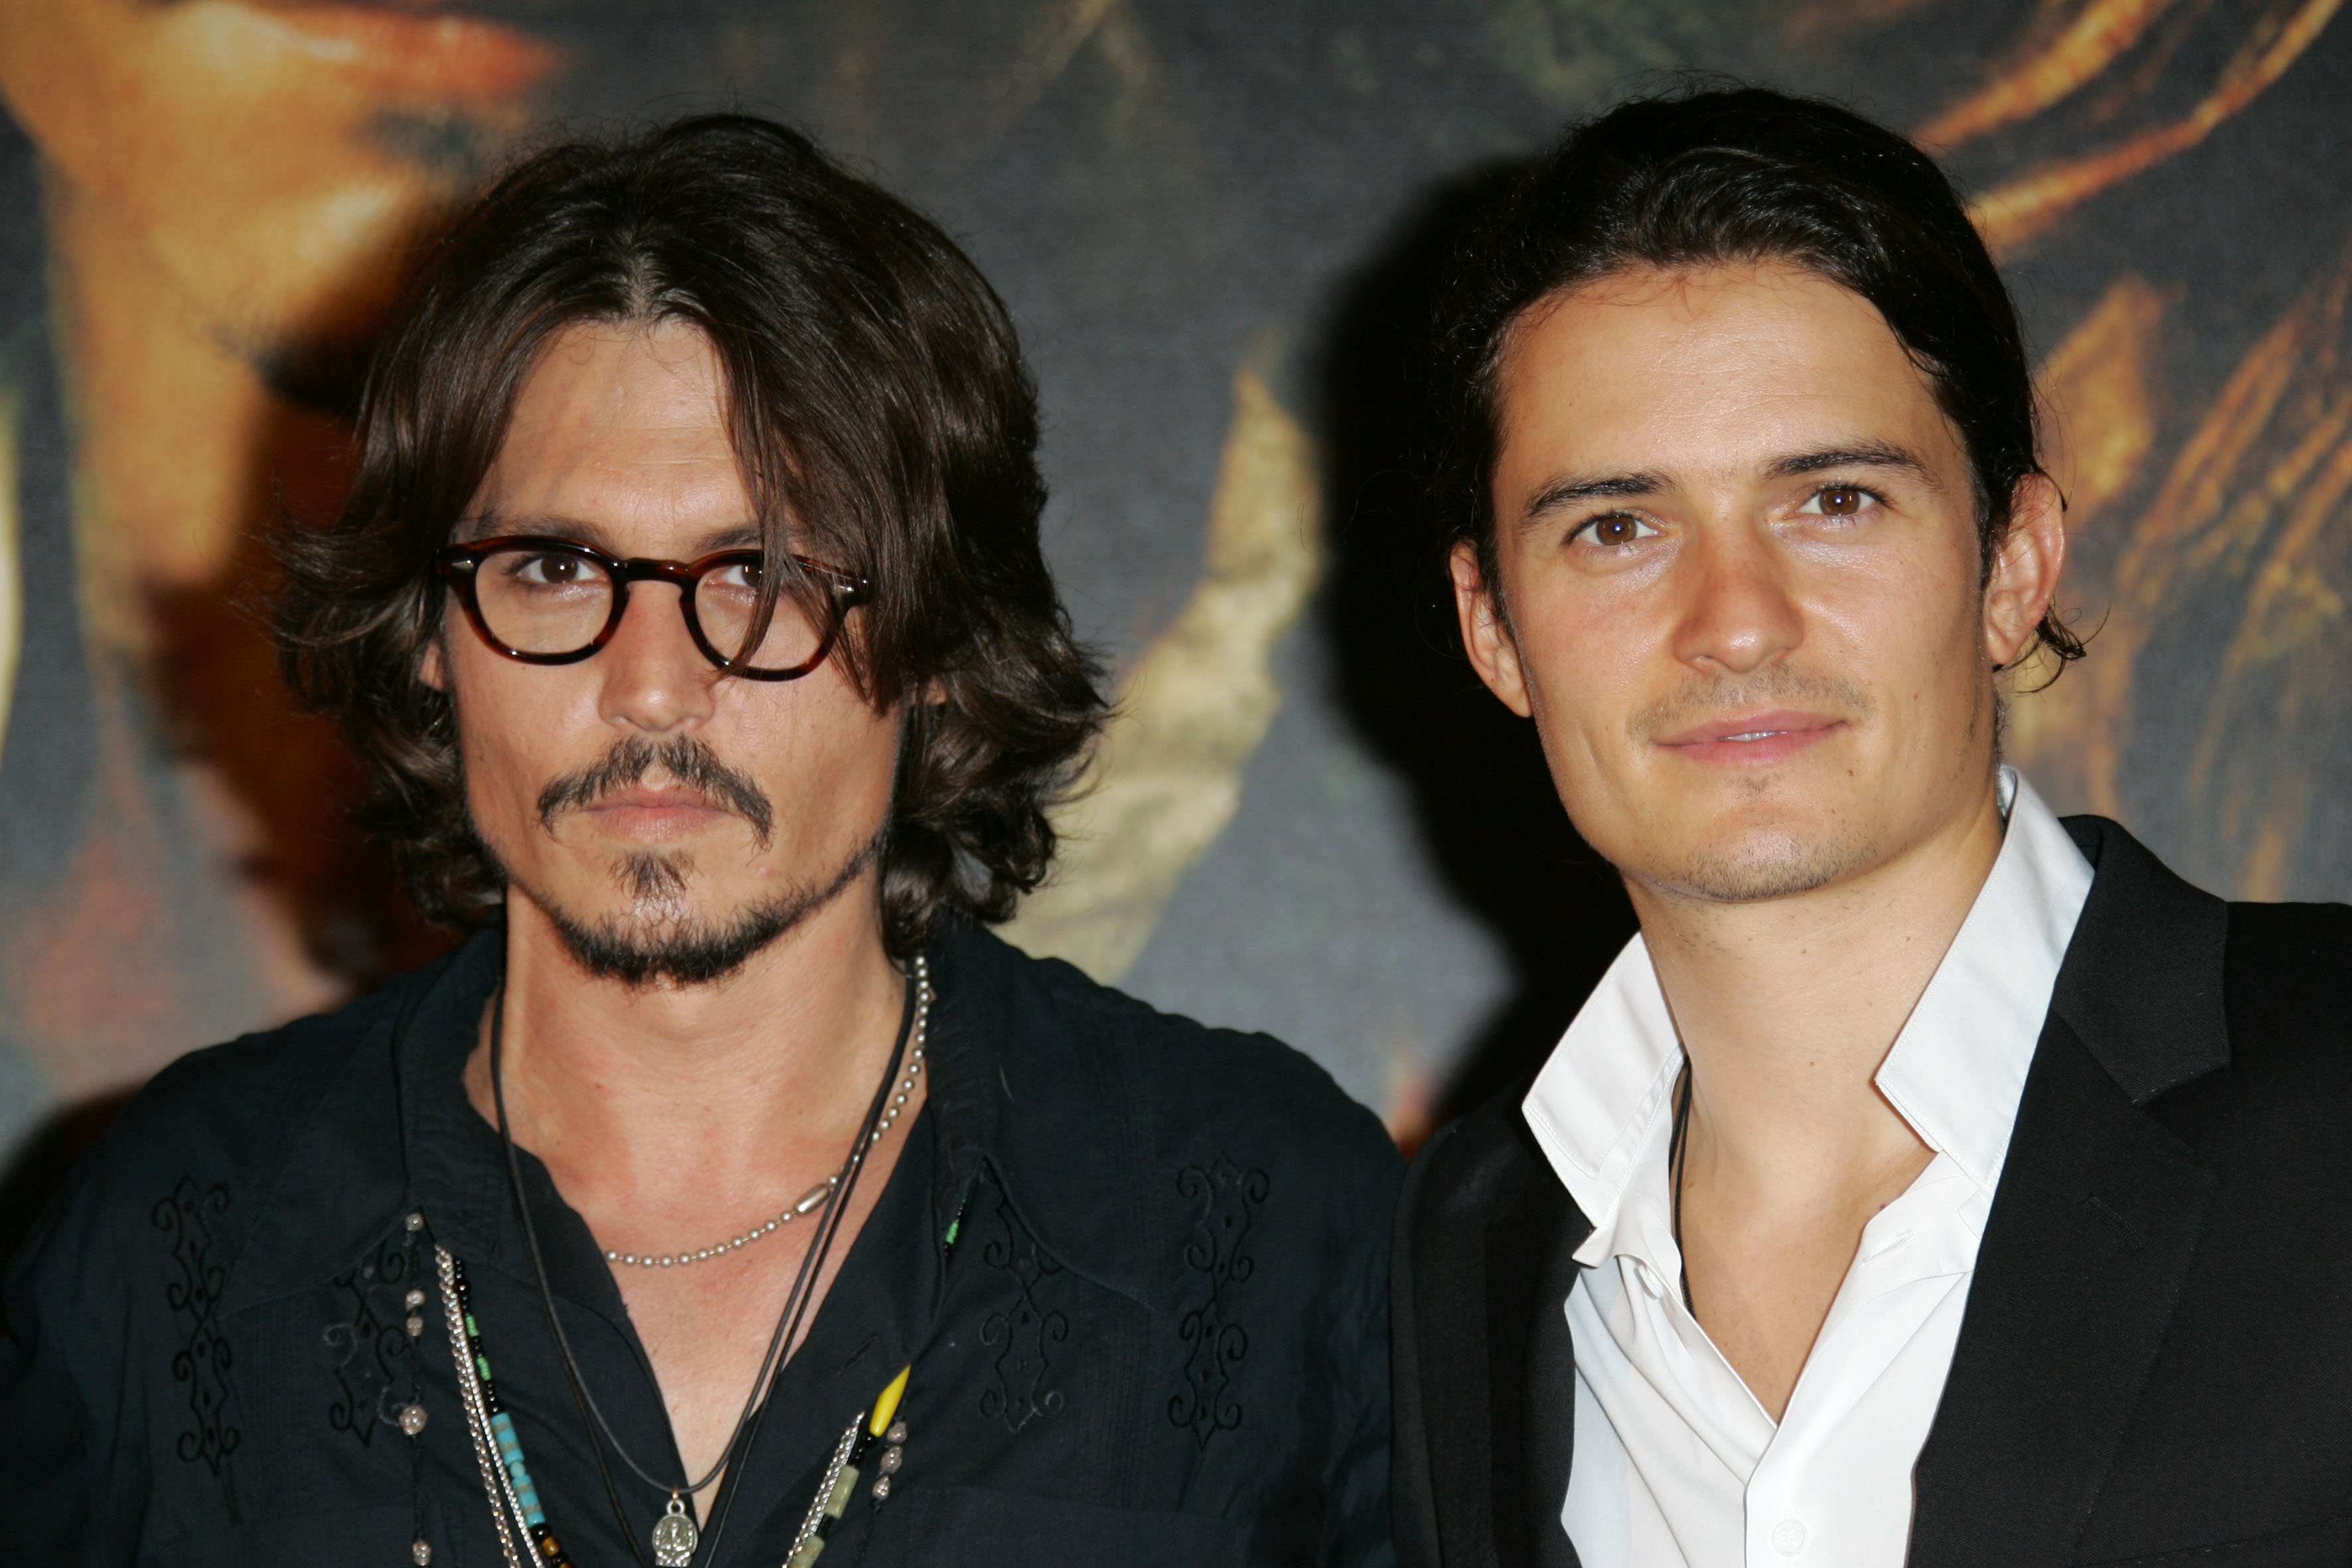 Which Celeb's Name Does Johnny Depp Have Tattooed Across His Heart?